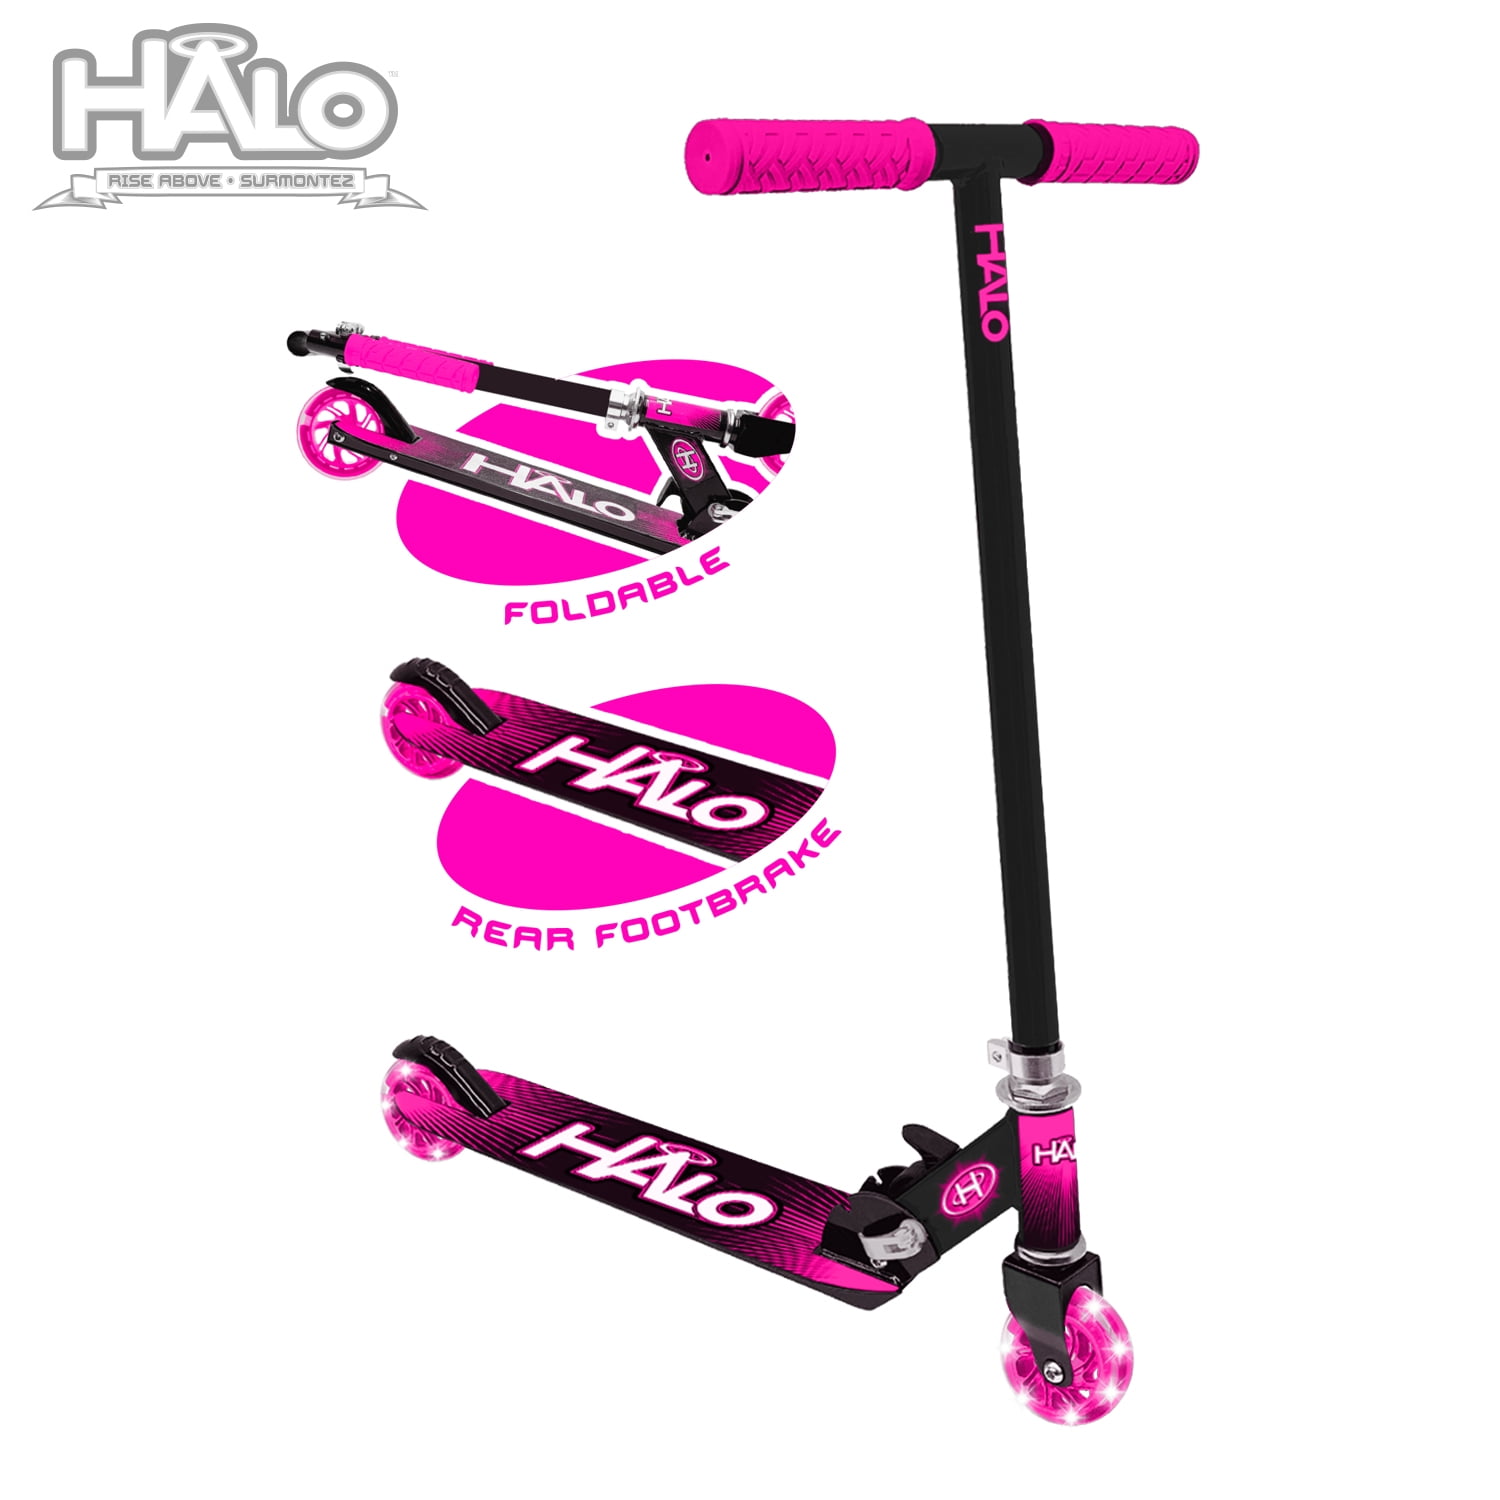 HALO Rise Above 6 Piece Inline Scooter Complete Combo Set Blu for 5+ 